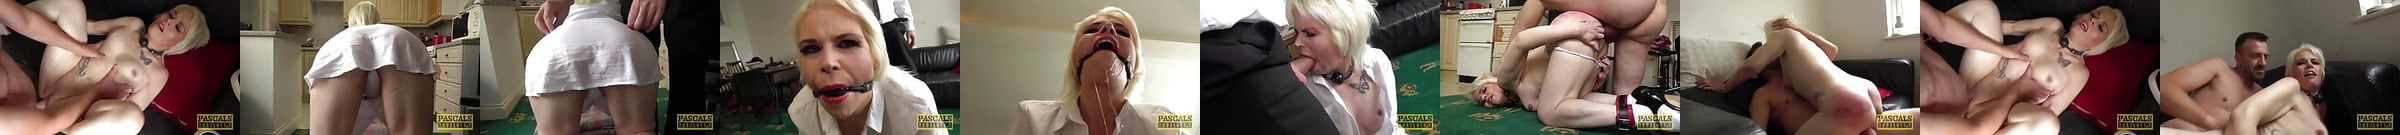 Pascalssubsluts English Redhead Submits To Dom Pascal Xhamster